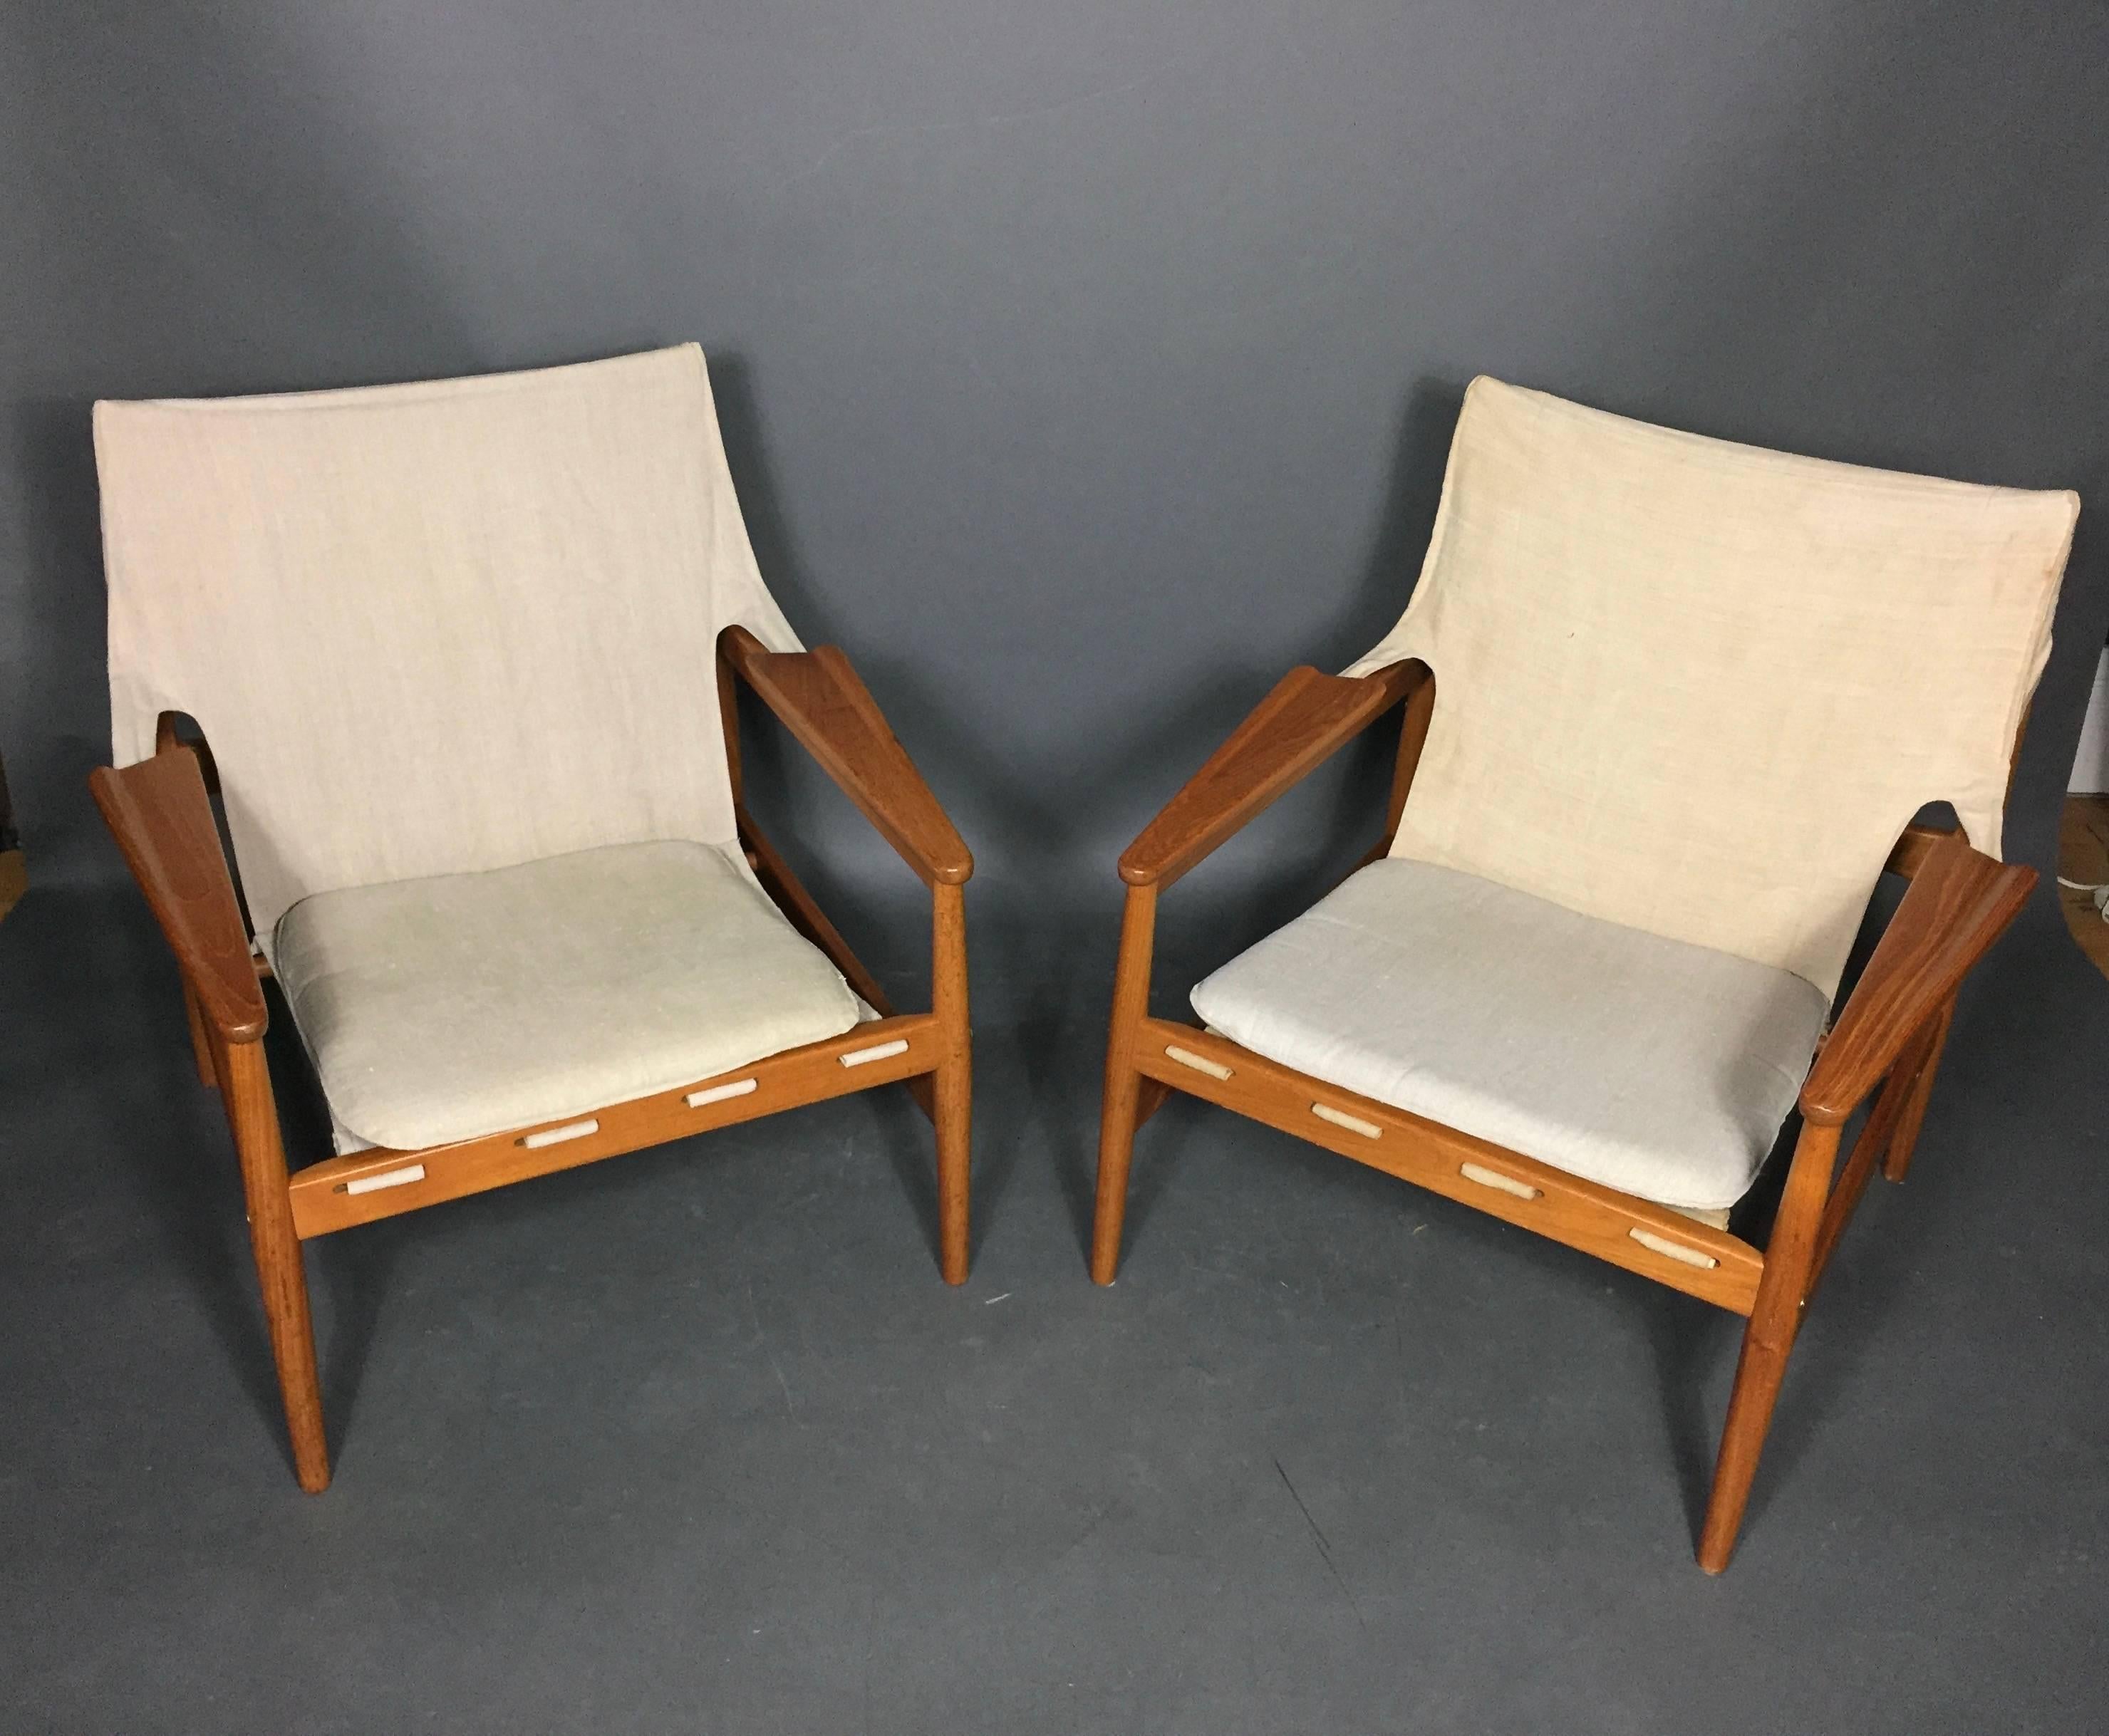 A very cool pair of sling chairs with canvas draped from top to chair seat front and supported with three buckled straps. Loose seat cushion. Designed by Hans Olsen (attributed) following a design originally completed for Viska Mobler, Sweden,